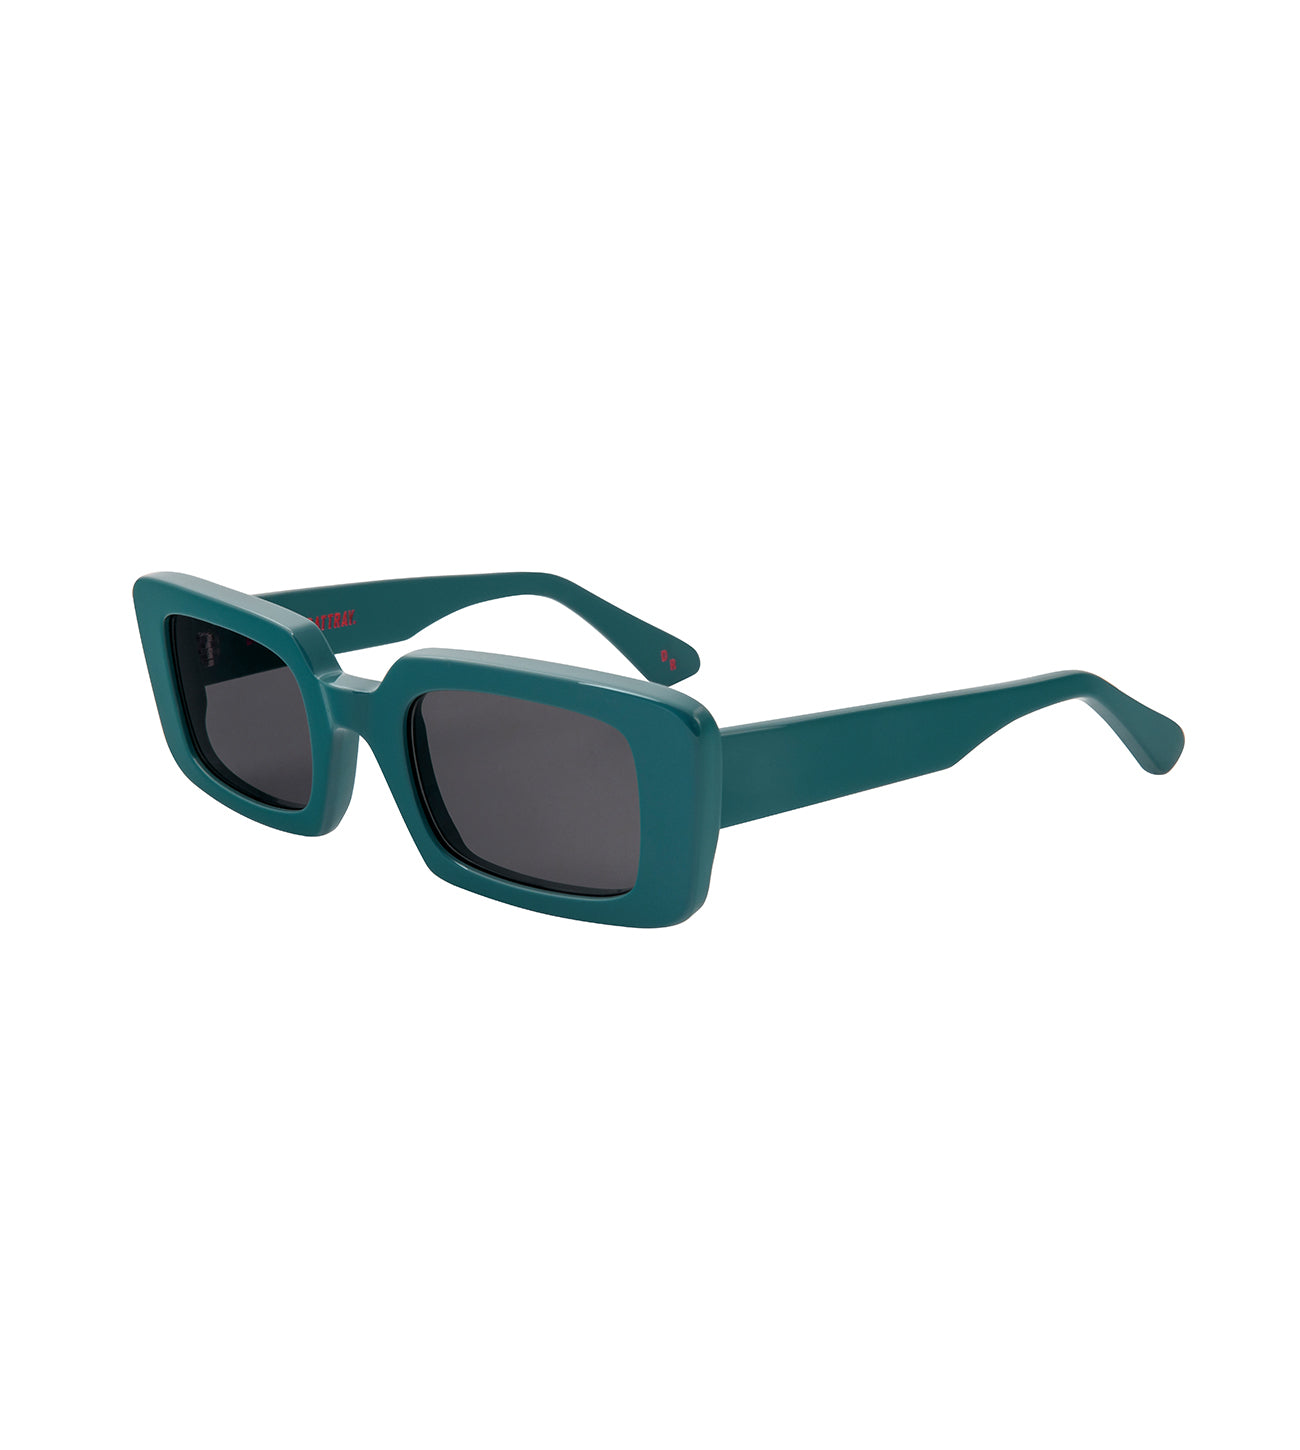 Nola Teal Sunglasses by Danielle Rattray 